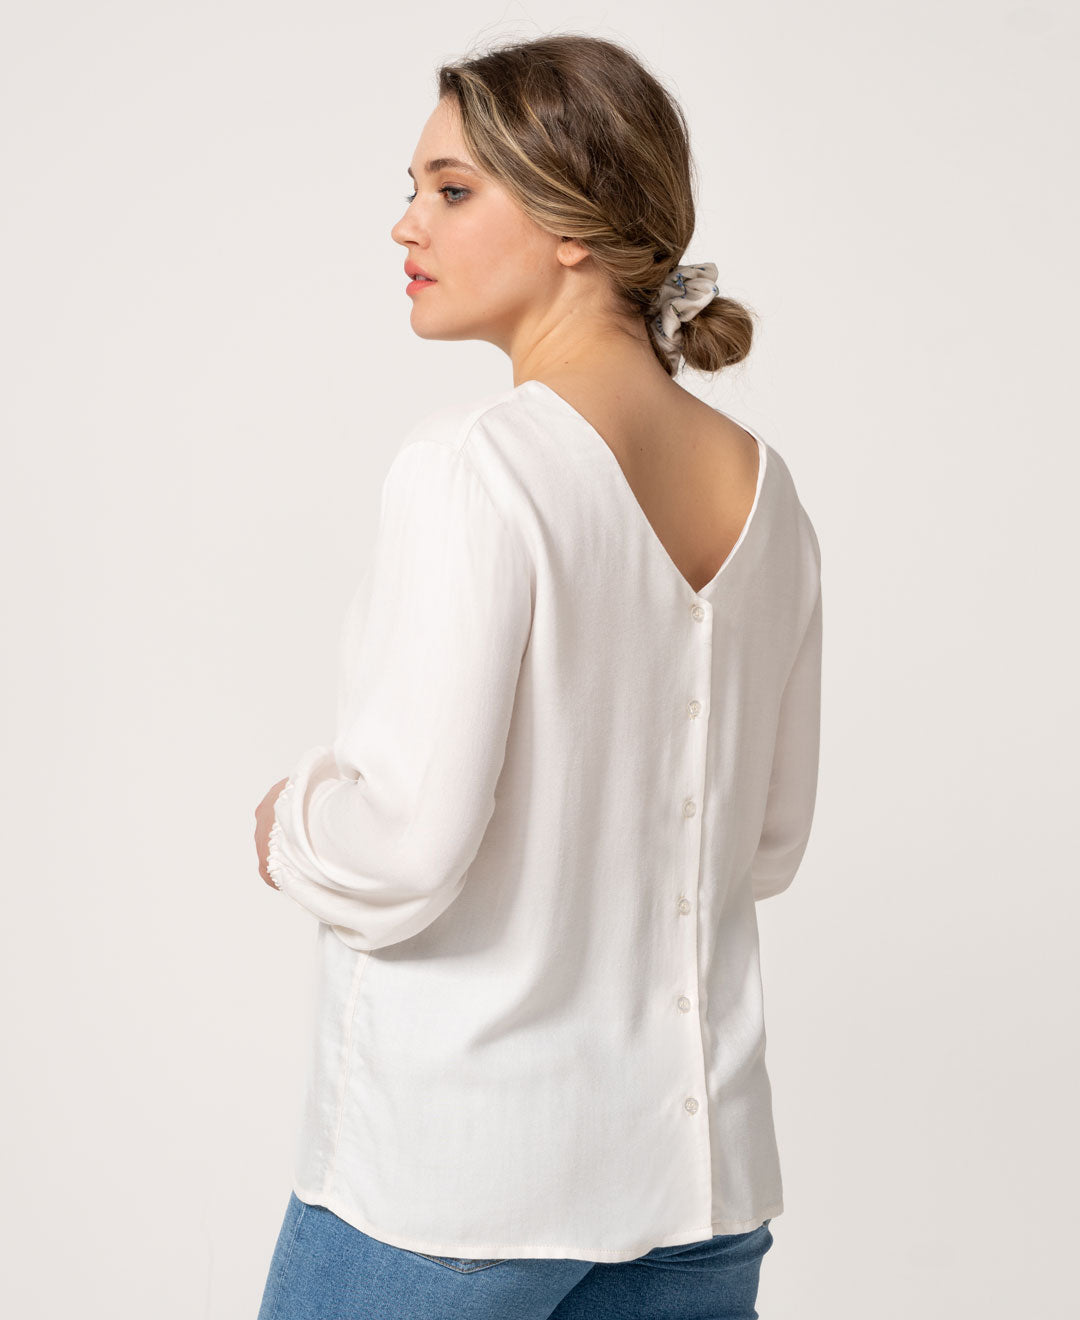 With defect - The organic cotton reversible floral blouse